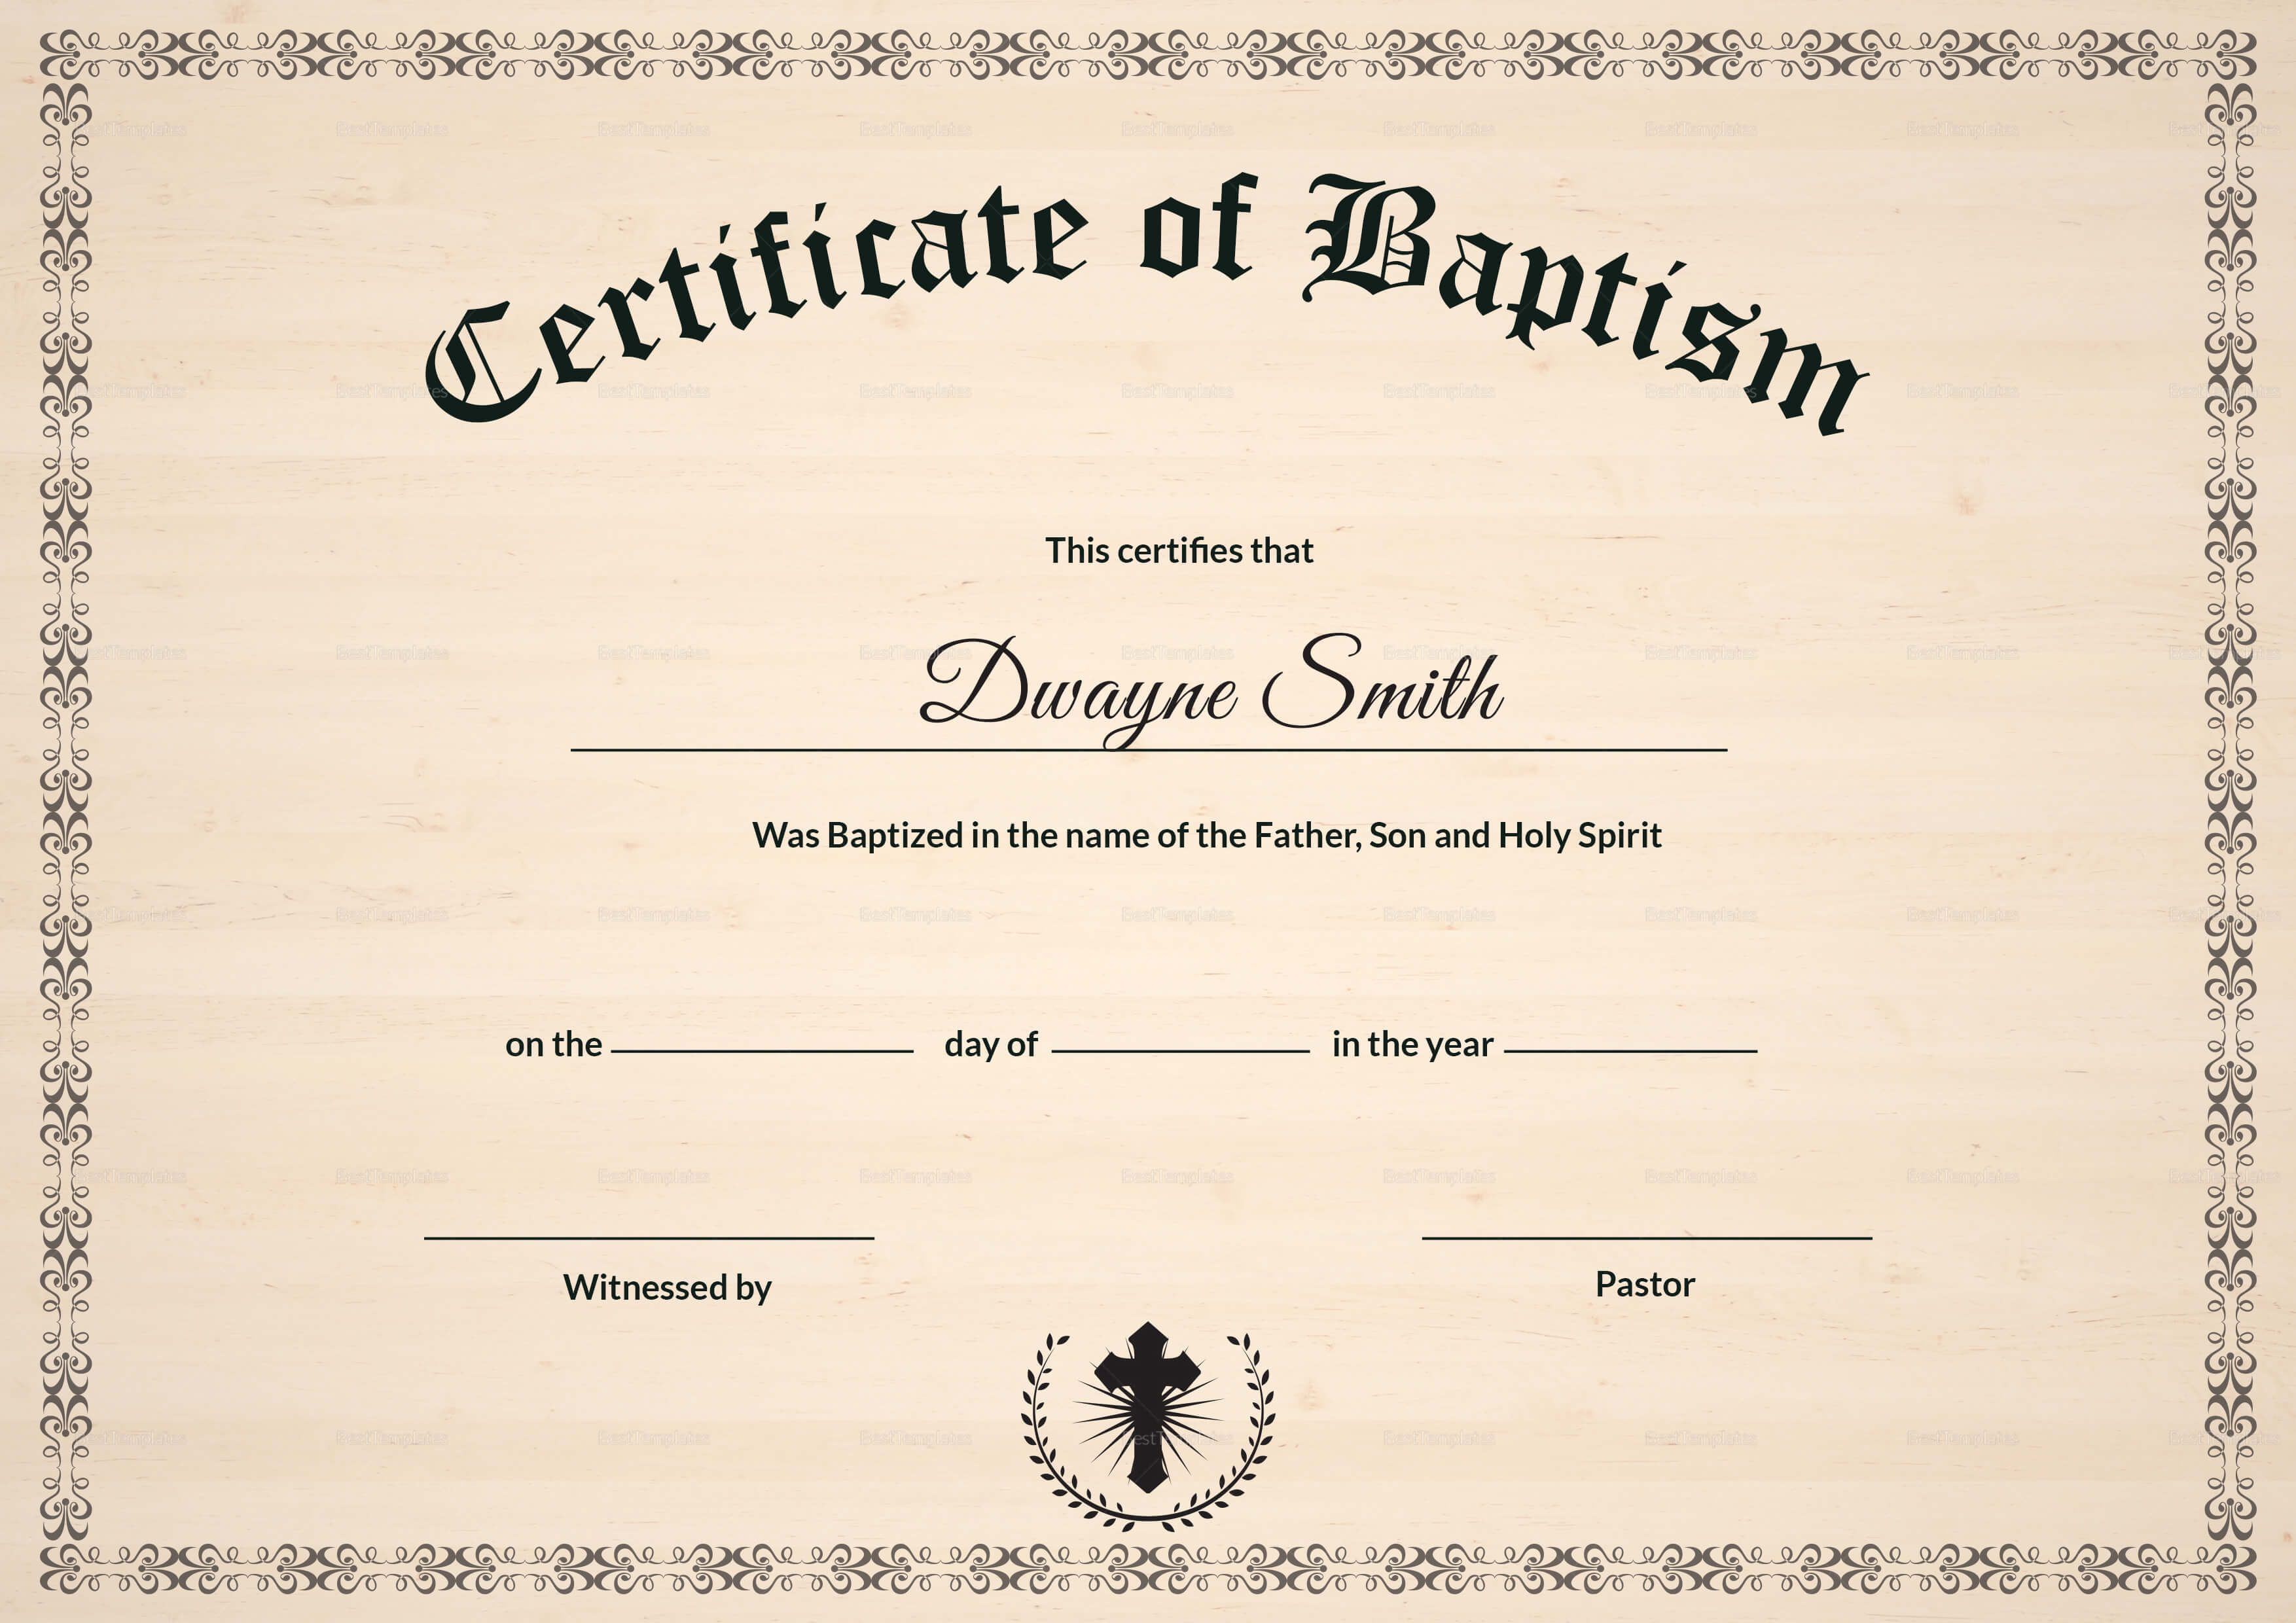 005 Certificate Of Baptism Template Baptism28129 Awesome Intended For Christian Baptism Certificate Template